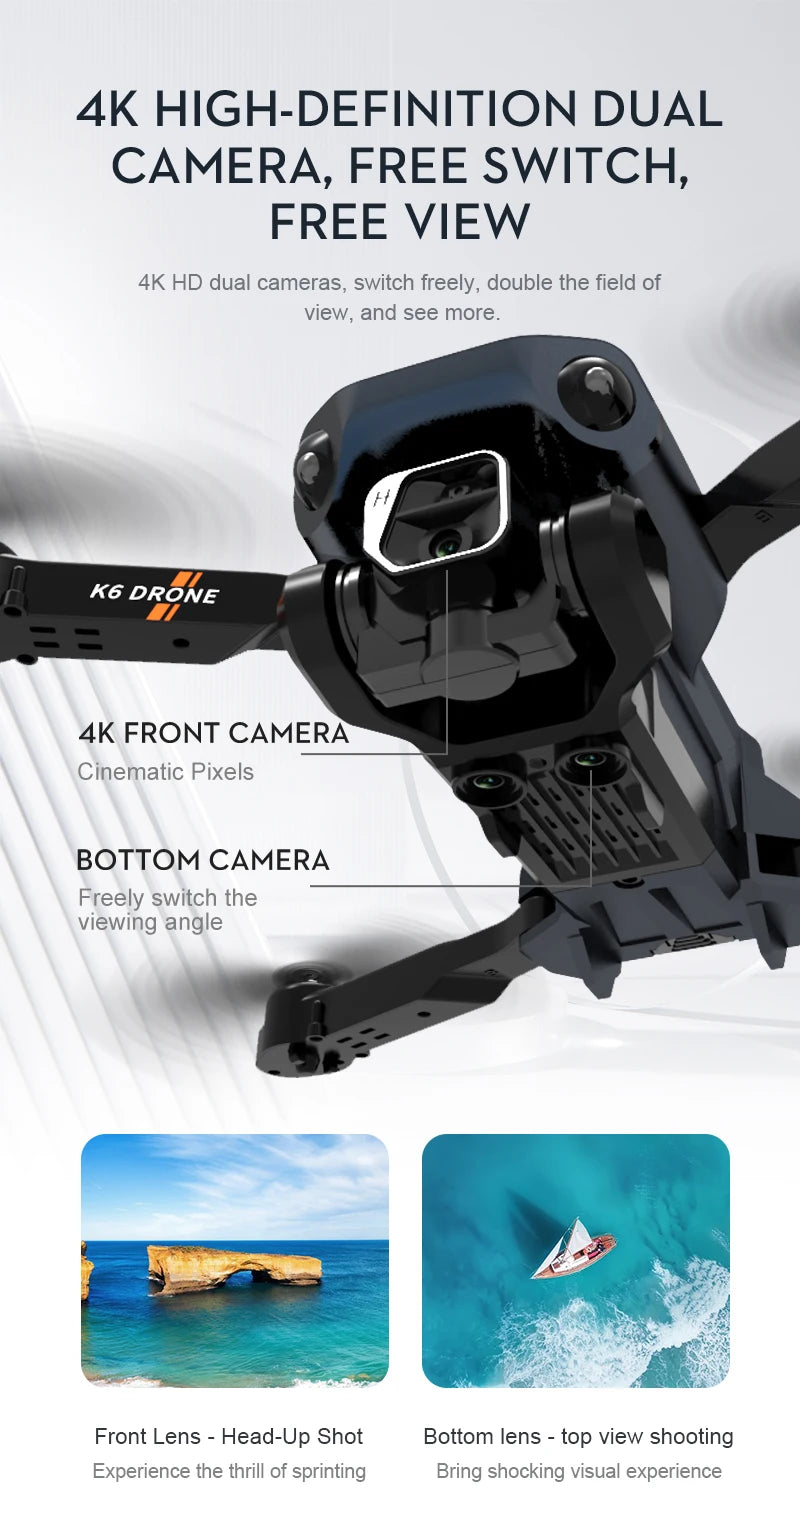 NEW K6 Drone, 4k high-definition dual camera, free switch, free